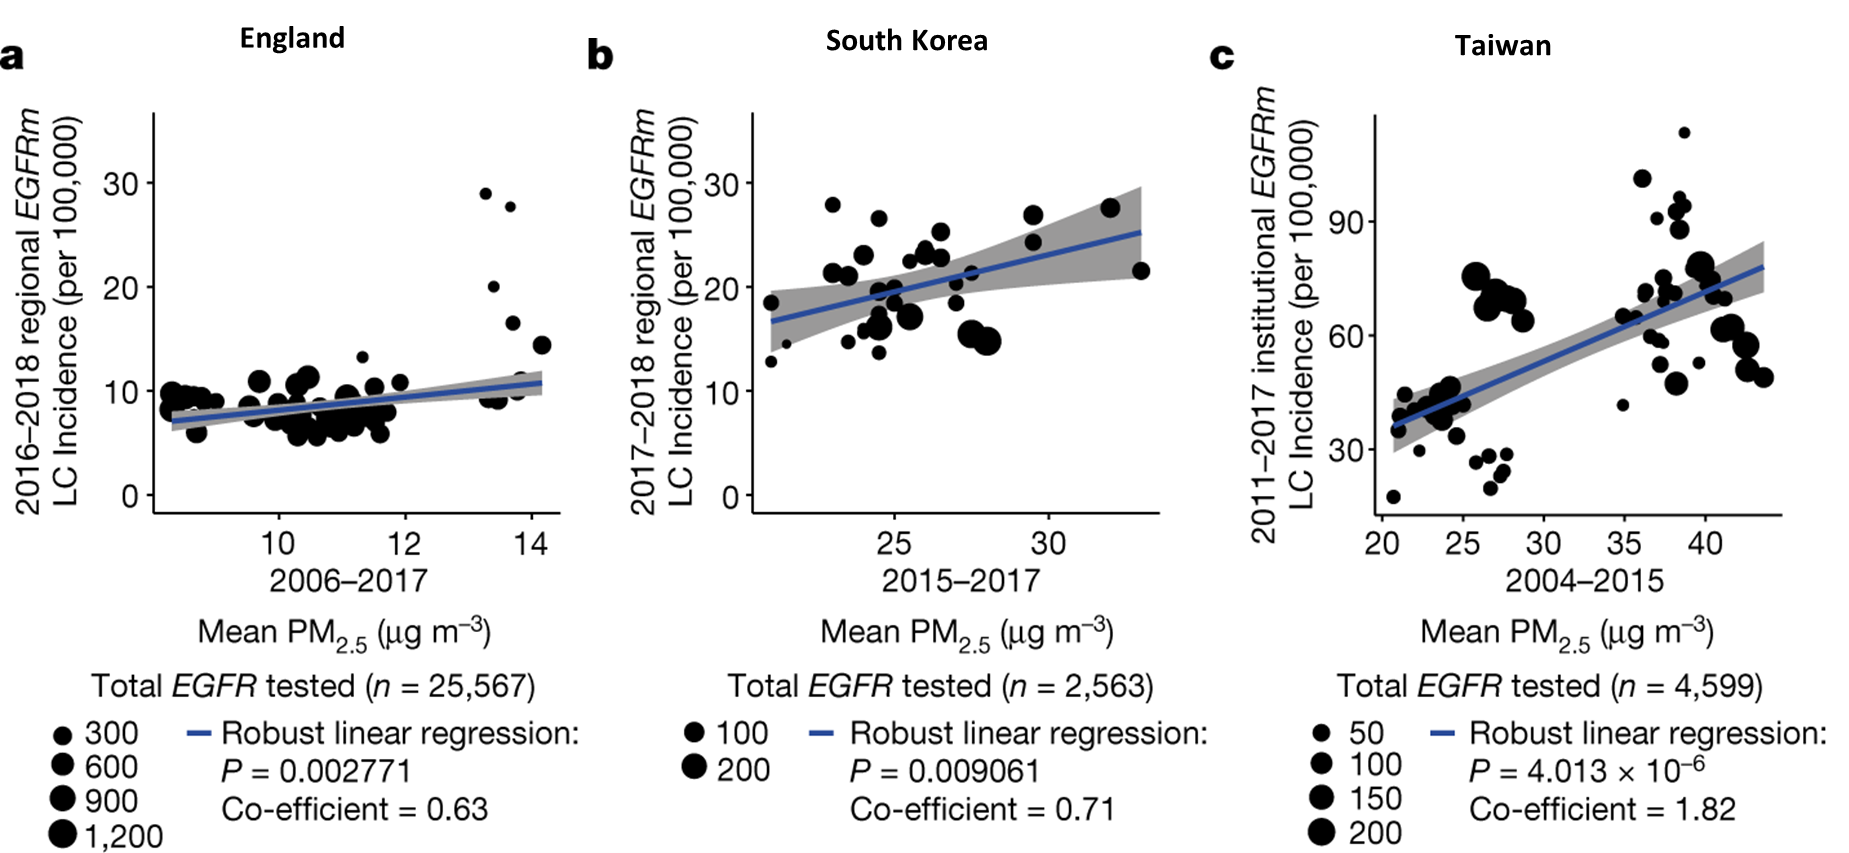 Scatter plots showing relationships between PM2.5 levels and estimated EGFR-driven lung cancer (LC) incidence